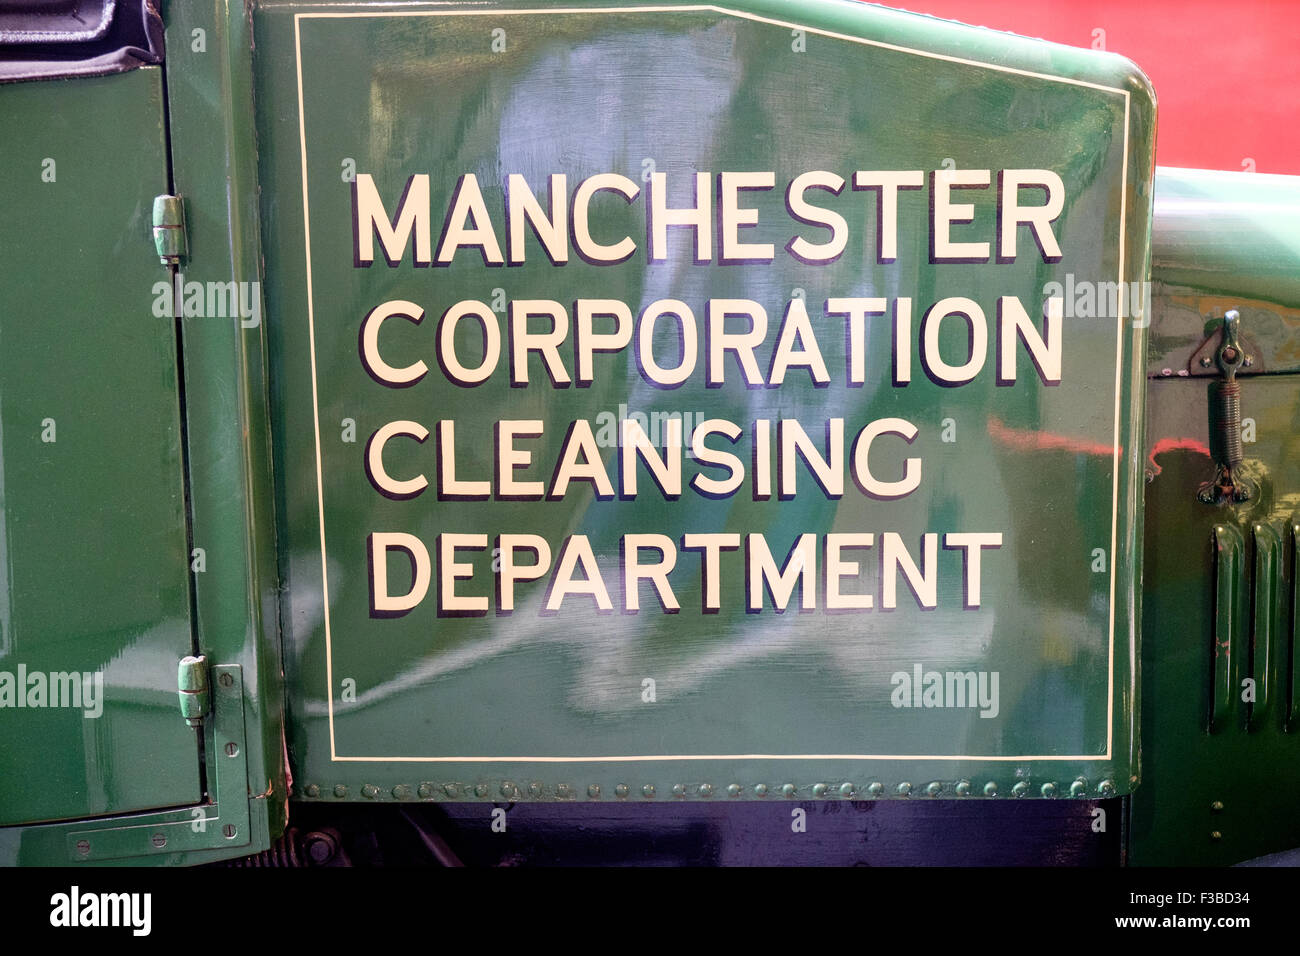 Manchester Corporate Cleansing Department sign on vehicle at Museum of Transport, Manchester, UK Stock Photo